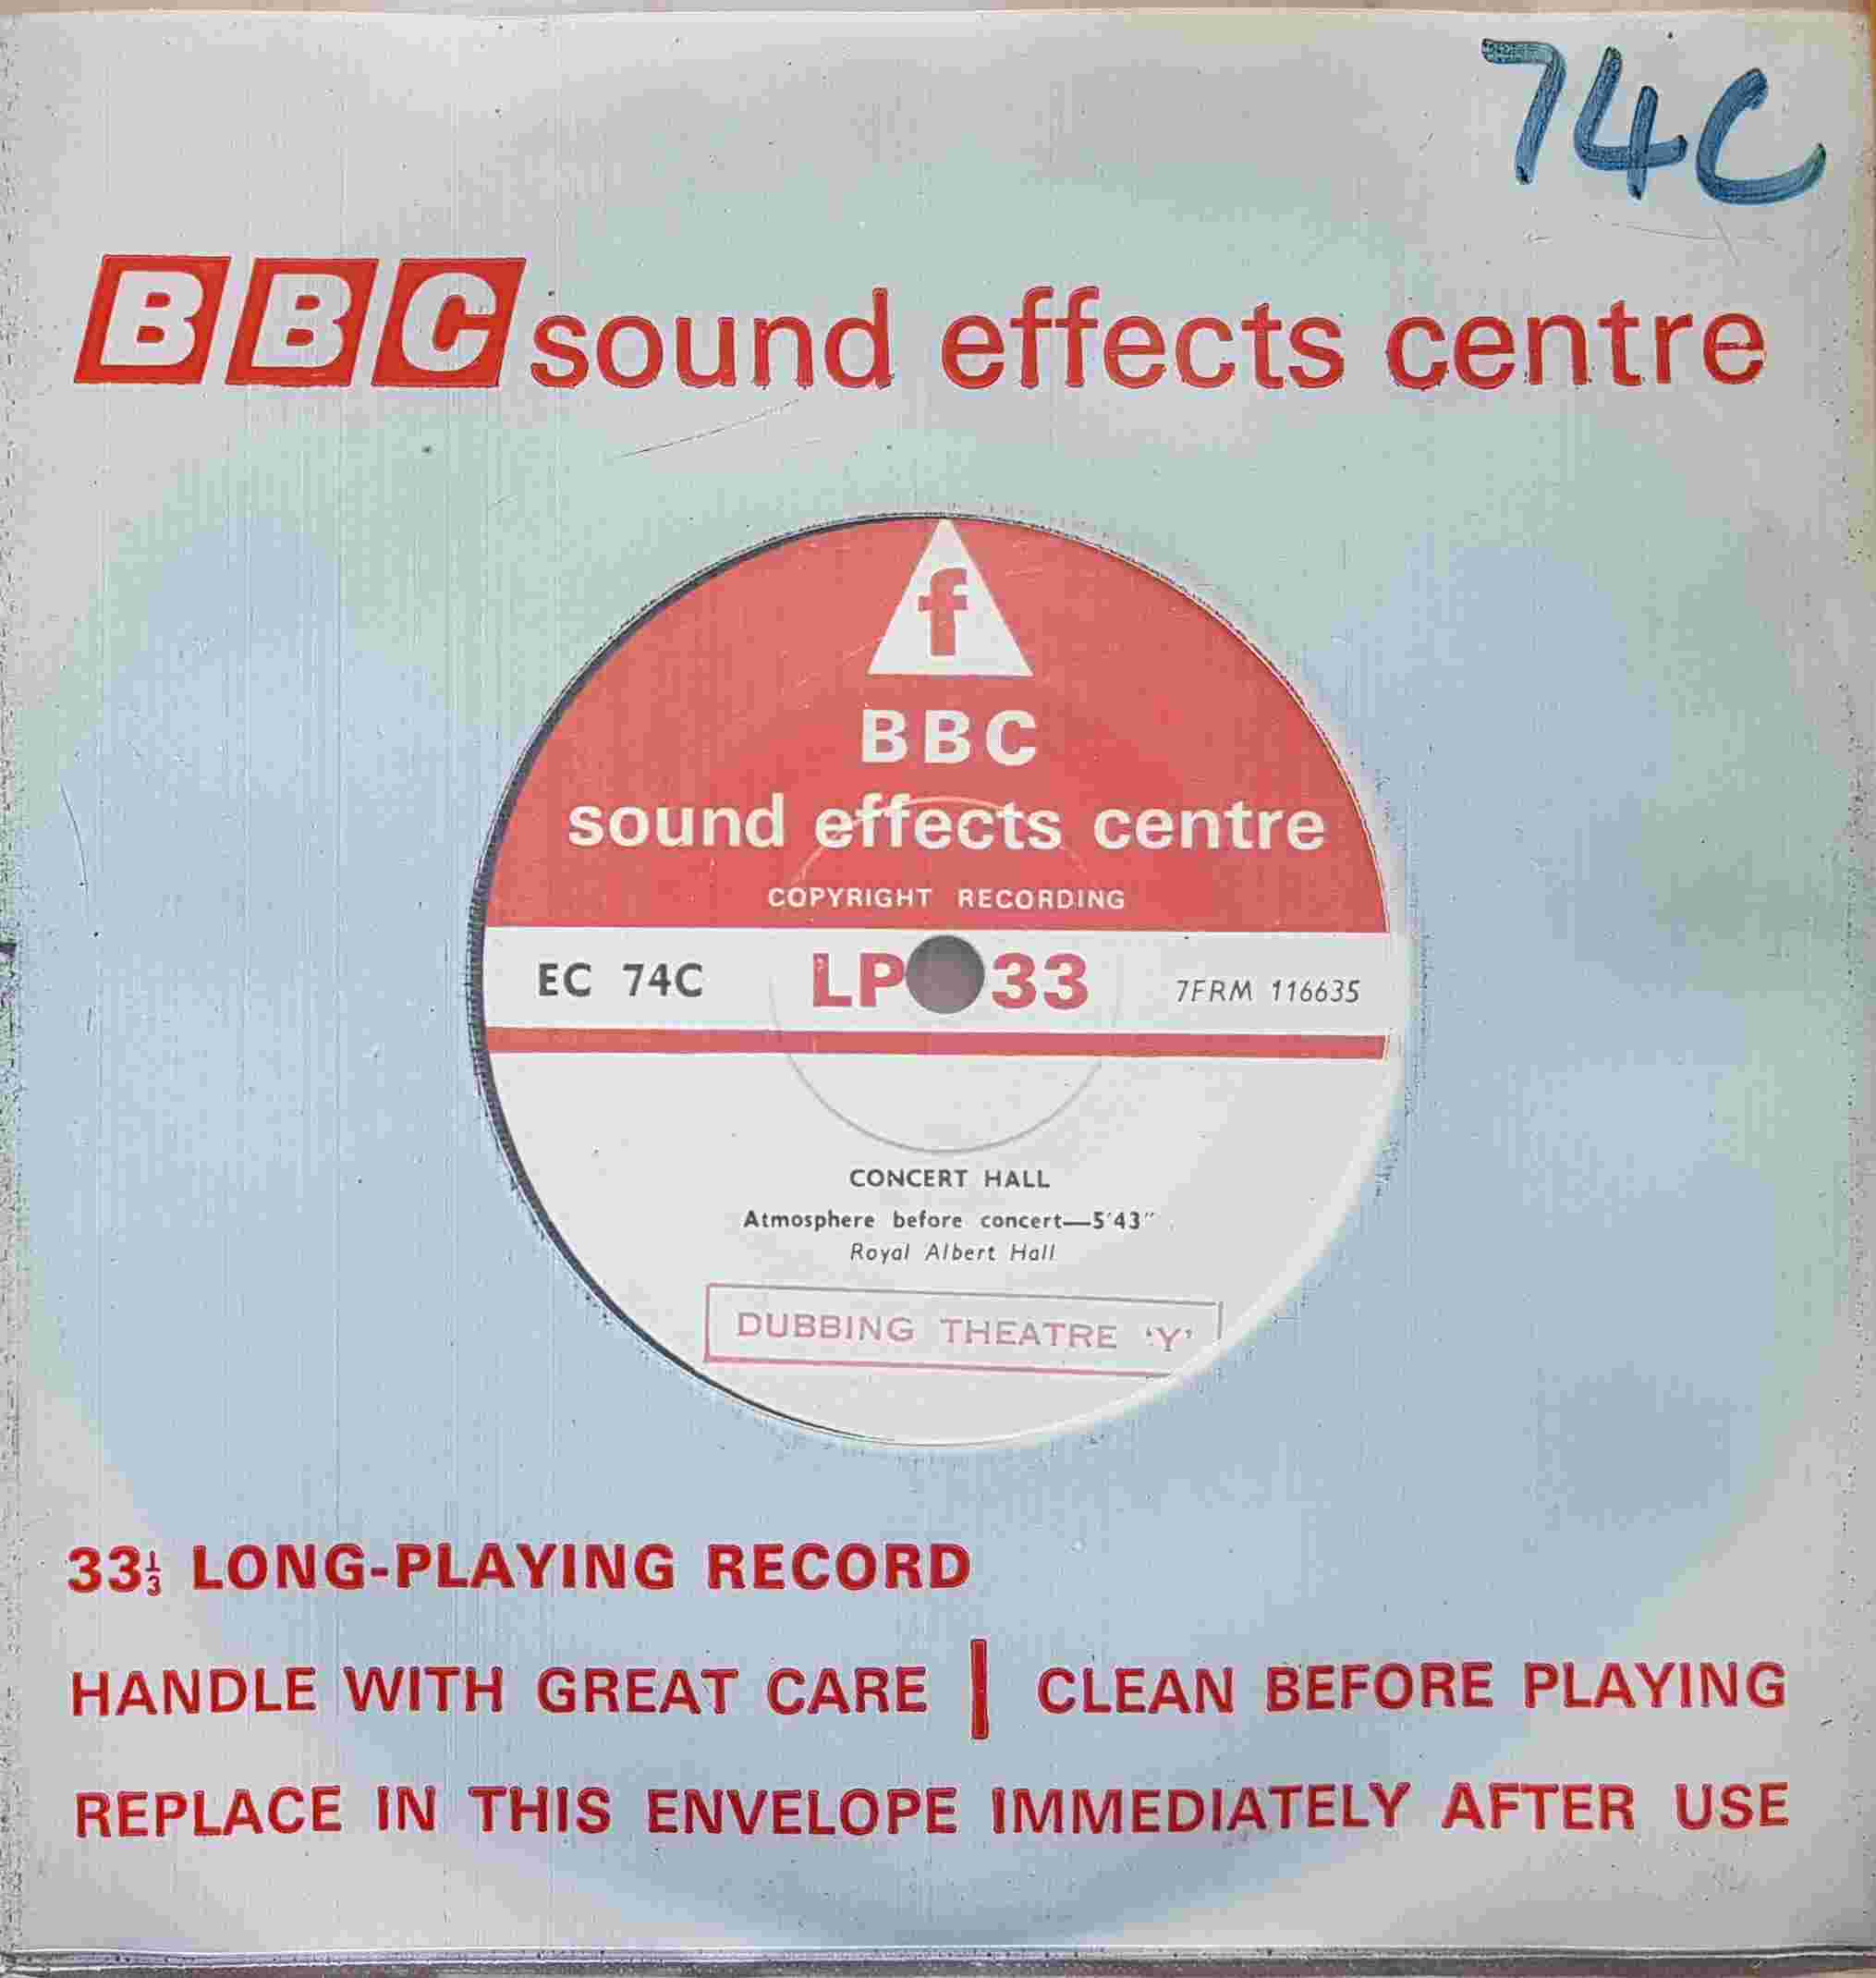 Picture of EC 74C Concert hall - Royal Albert Hall by artist Not registered from the BBC records and Tapes library